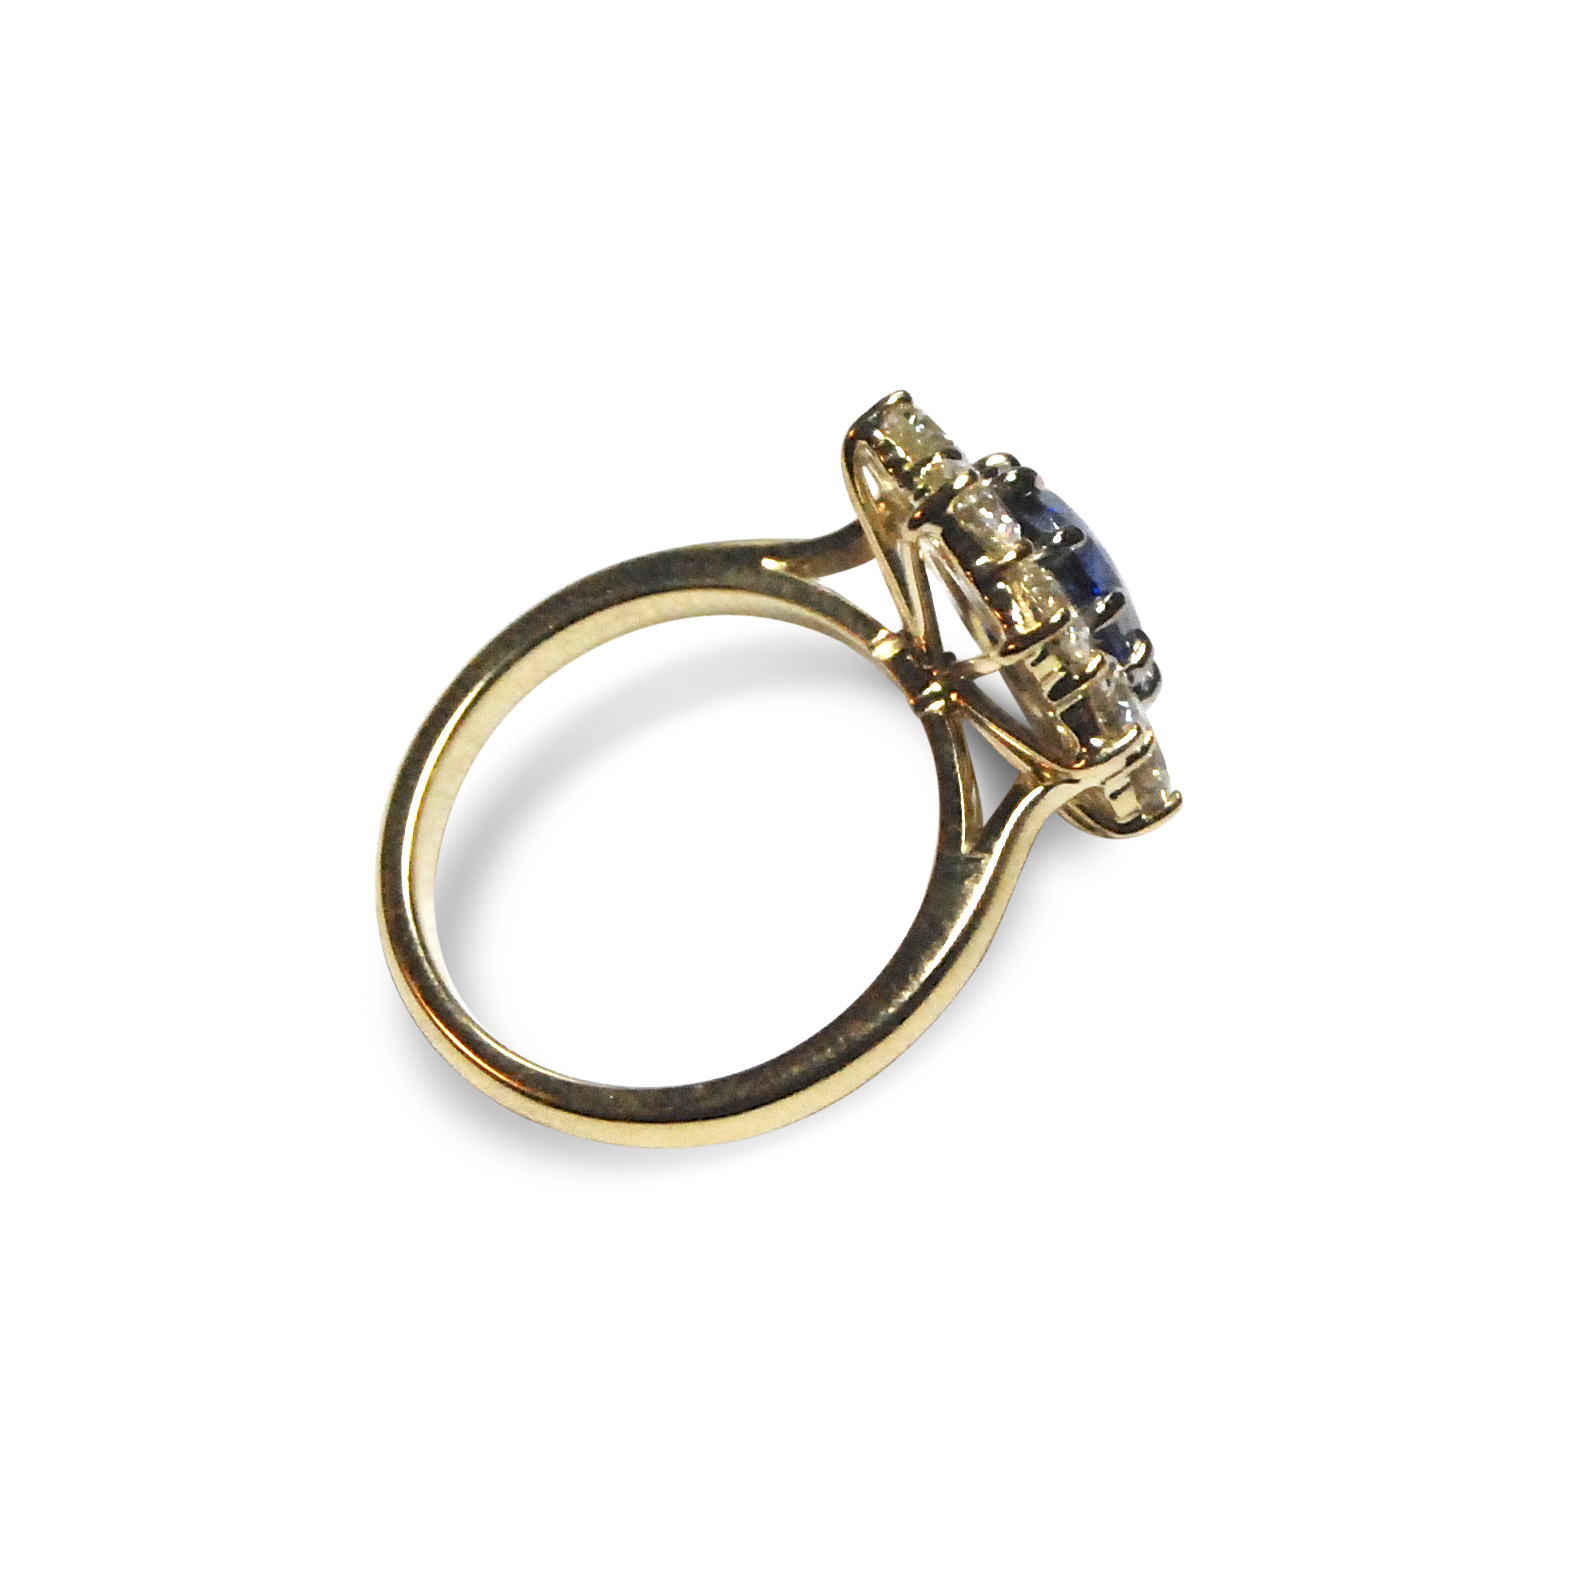 Sapphire-and-diamond-cluster-ring-mounted-in-yellow-gold-1.jpg